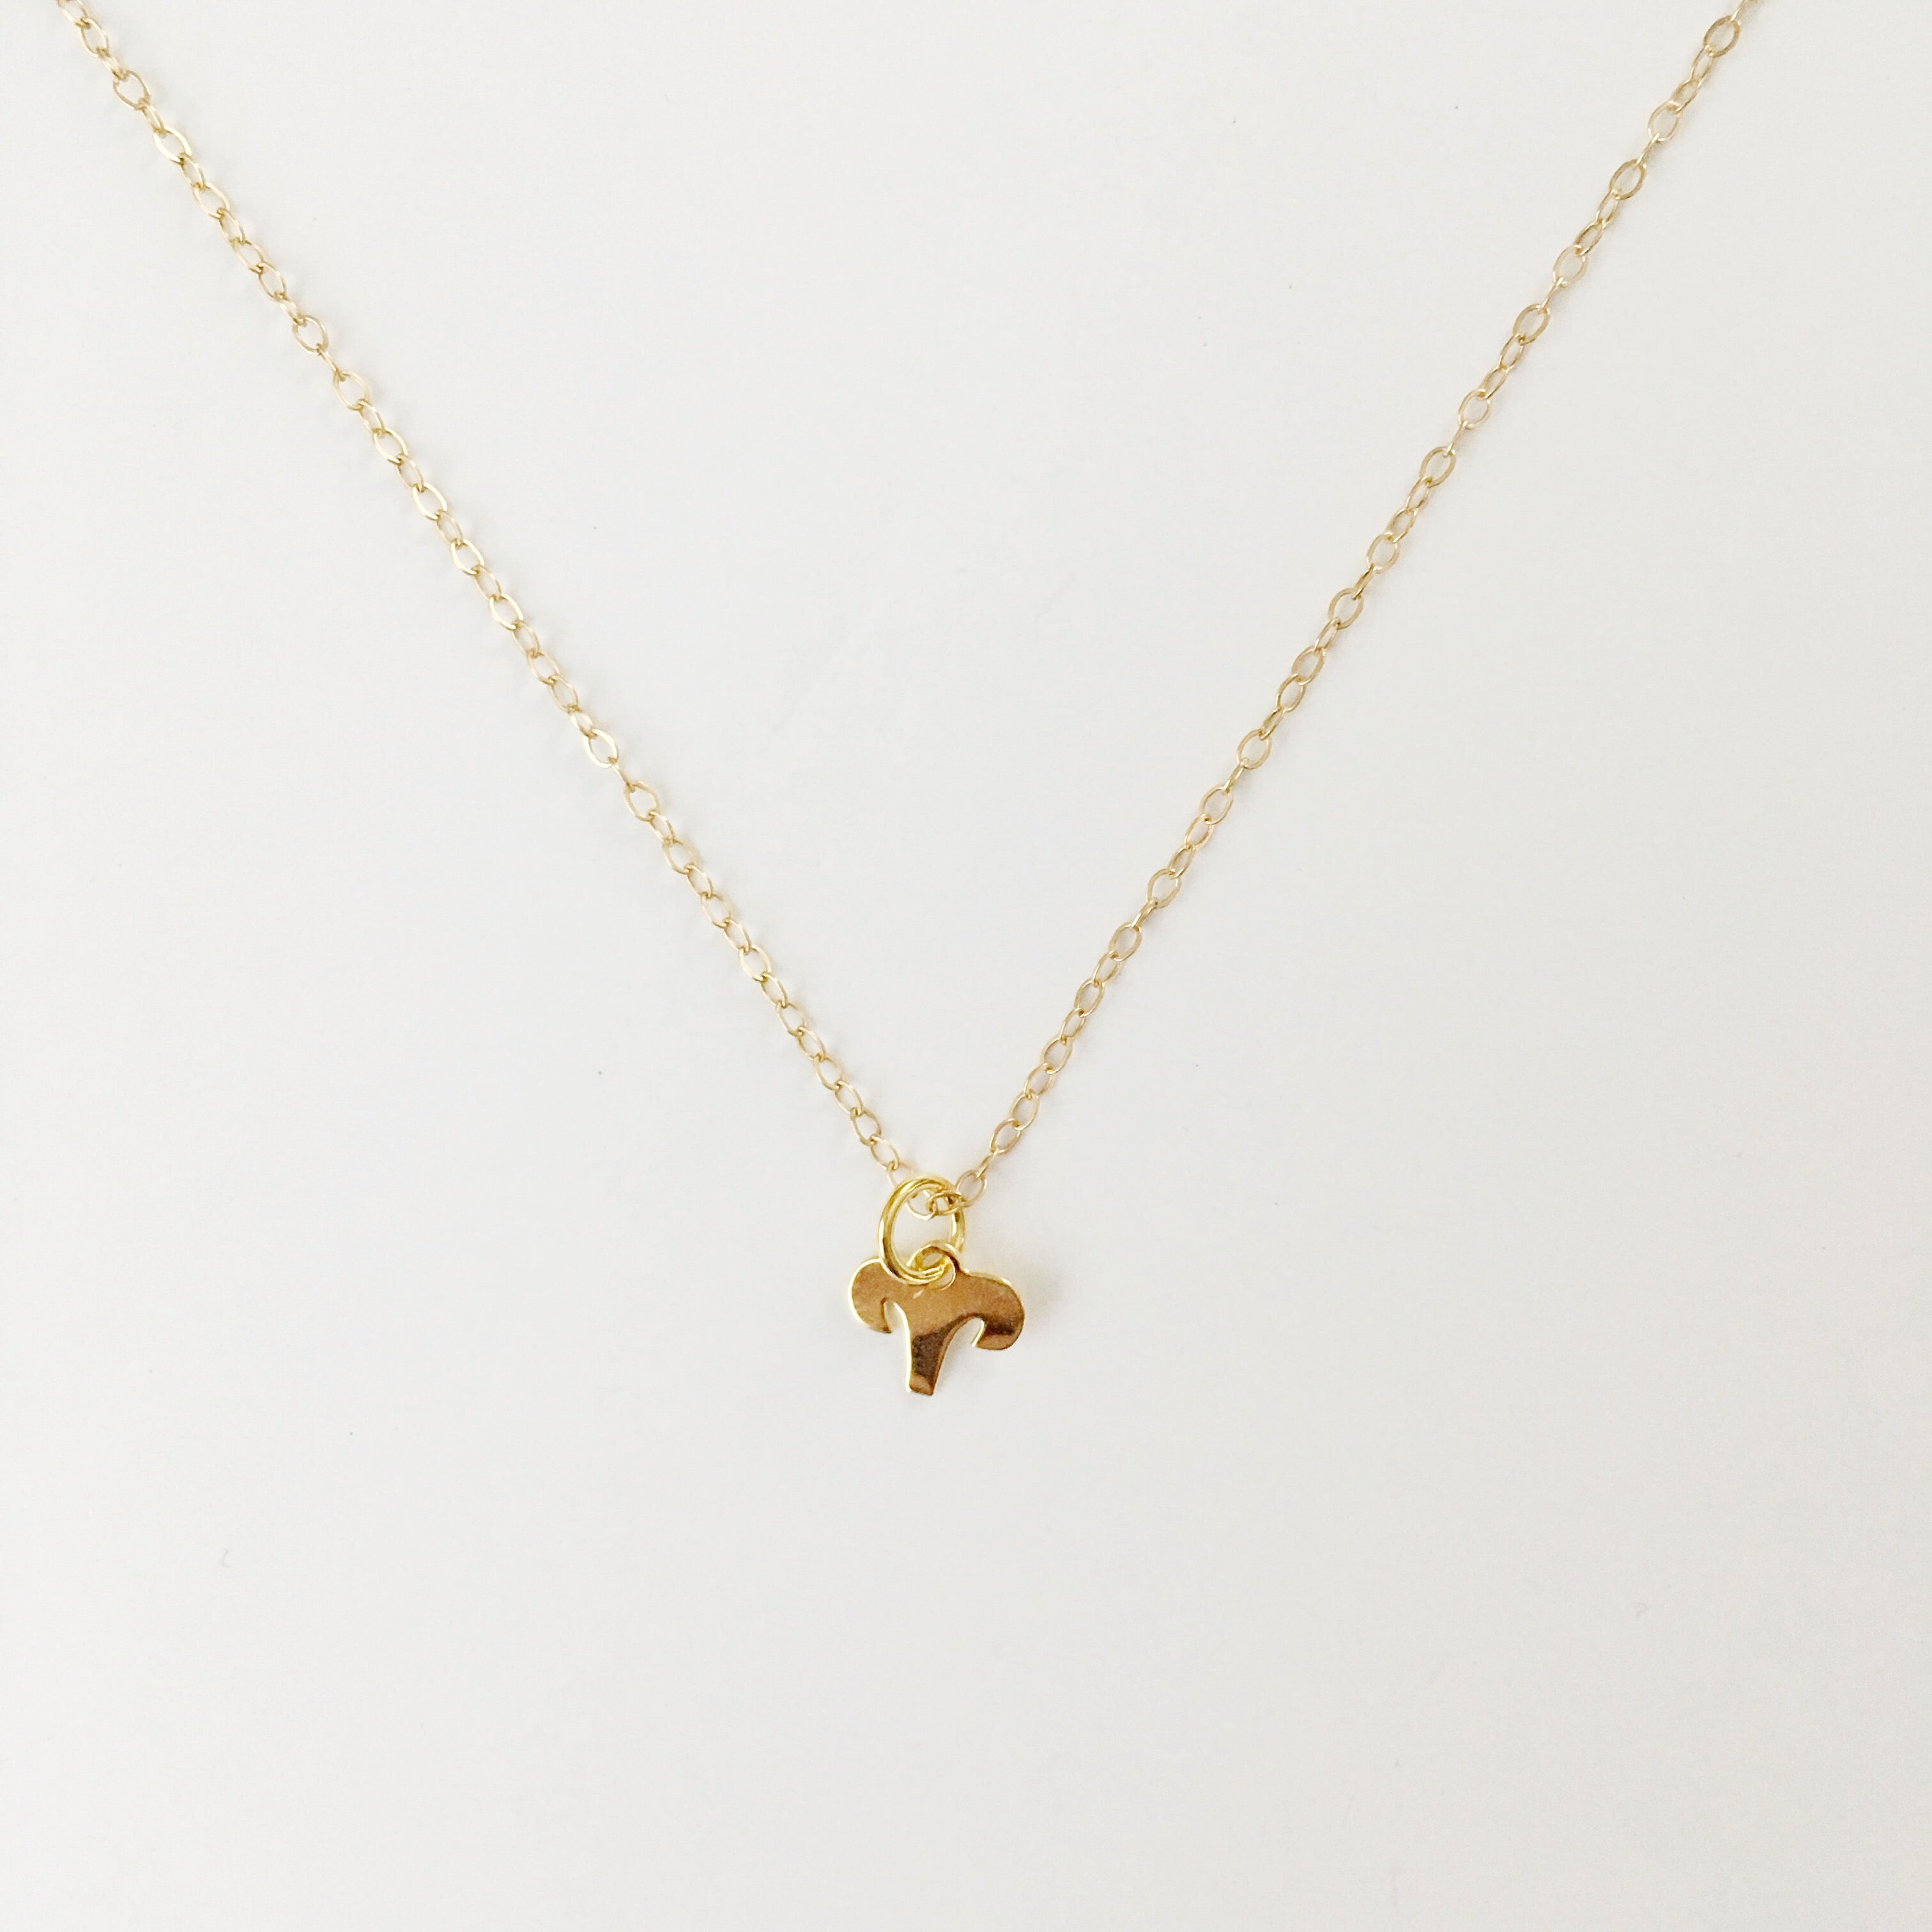 aries necklace astrology 